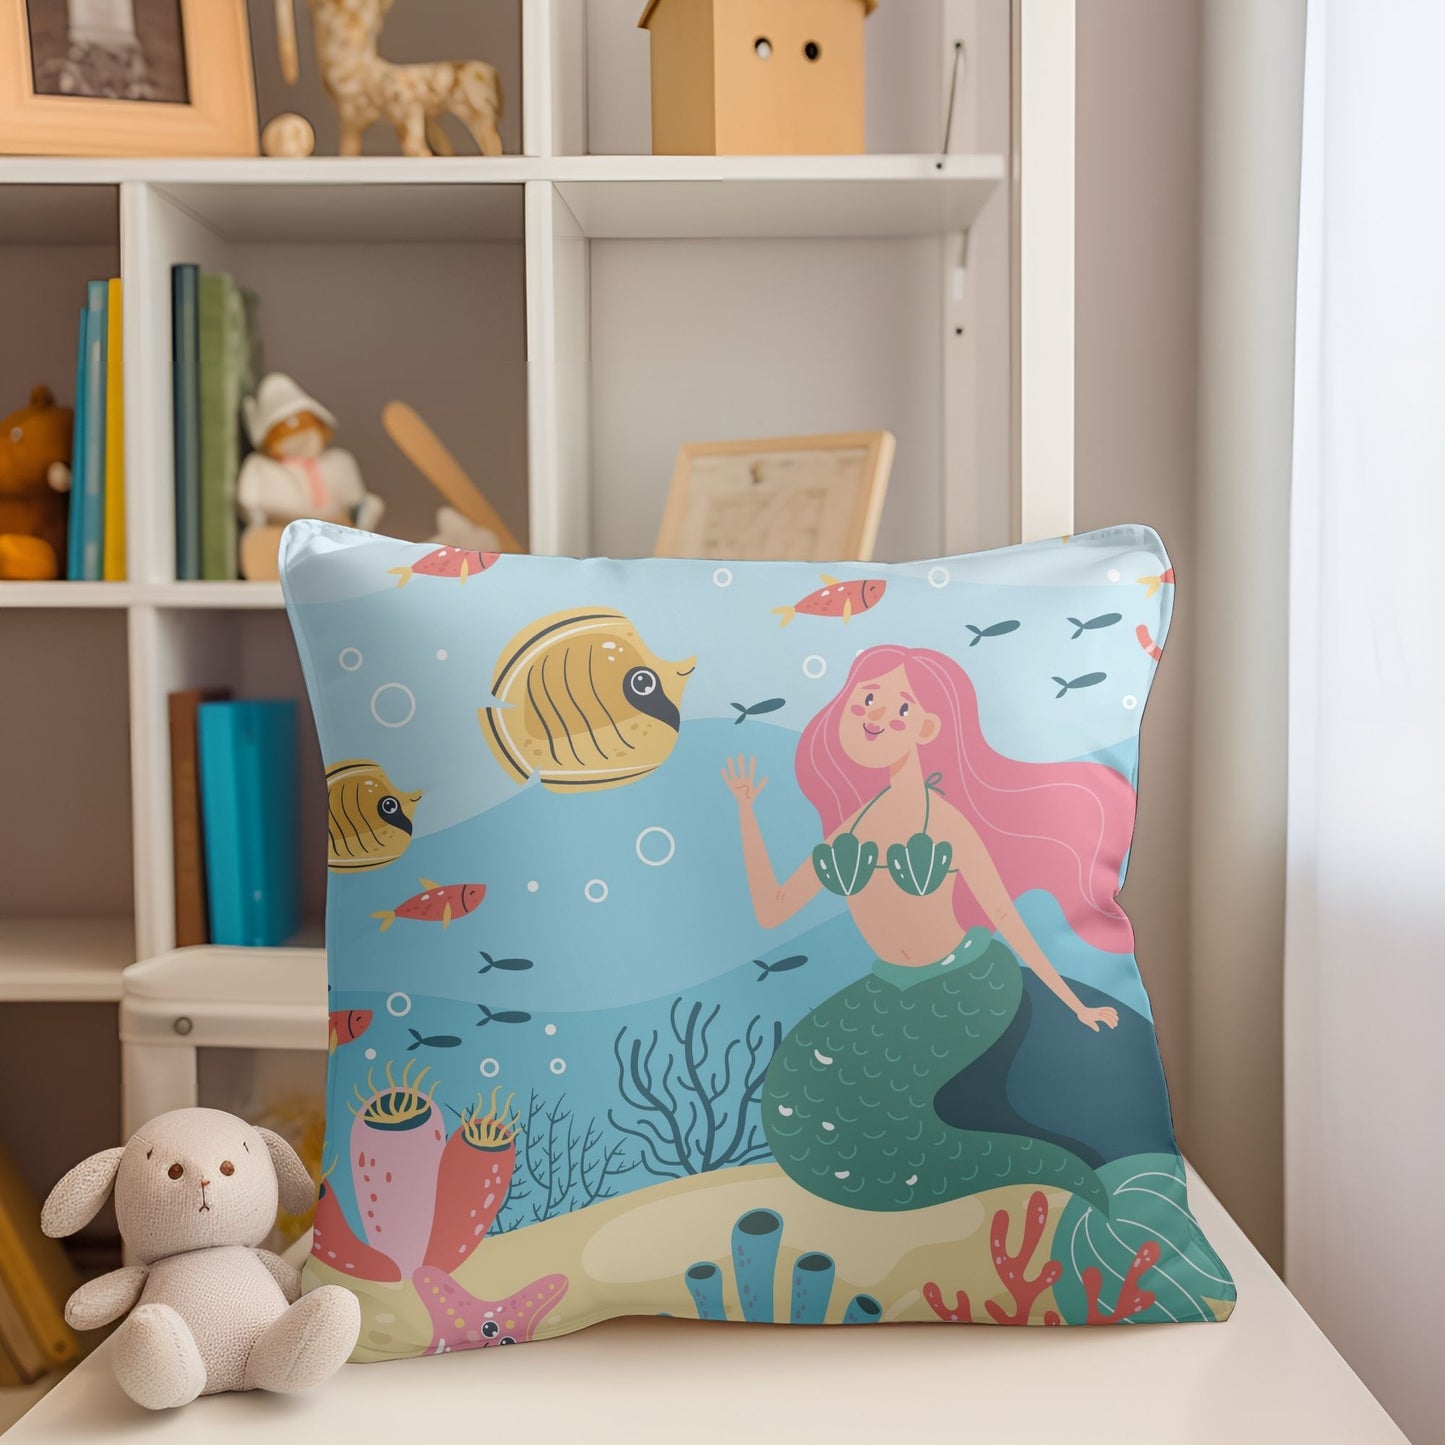 Charming pillow with mermaid print for girls' room decor.